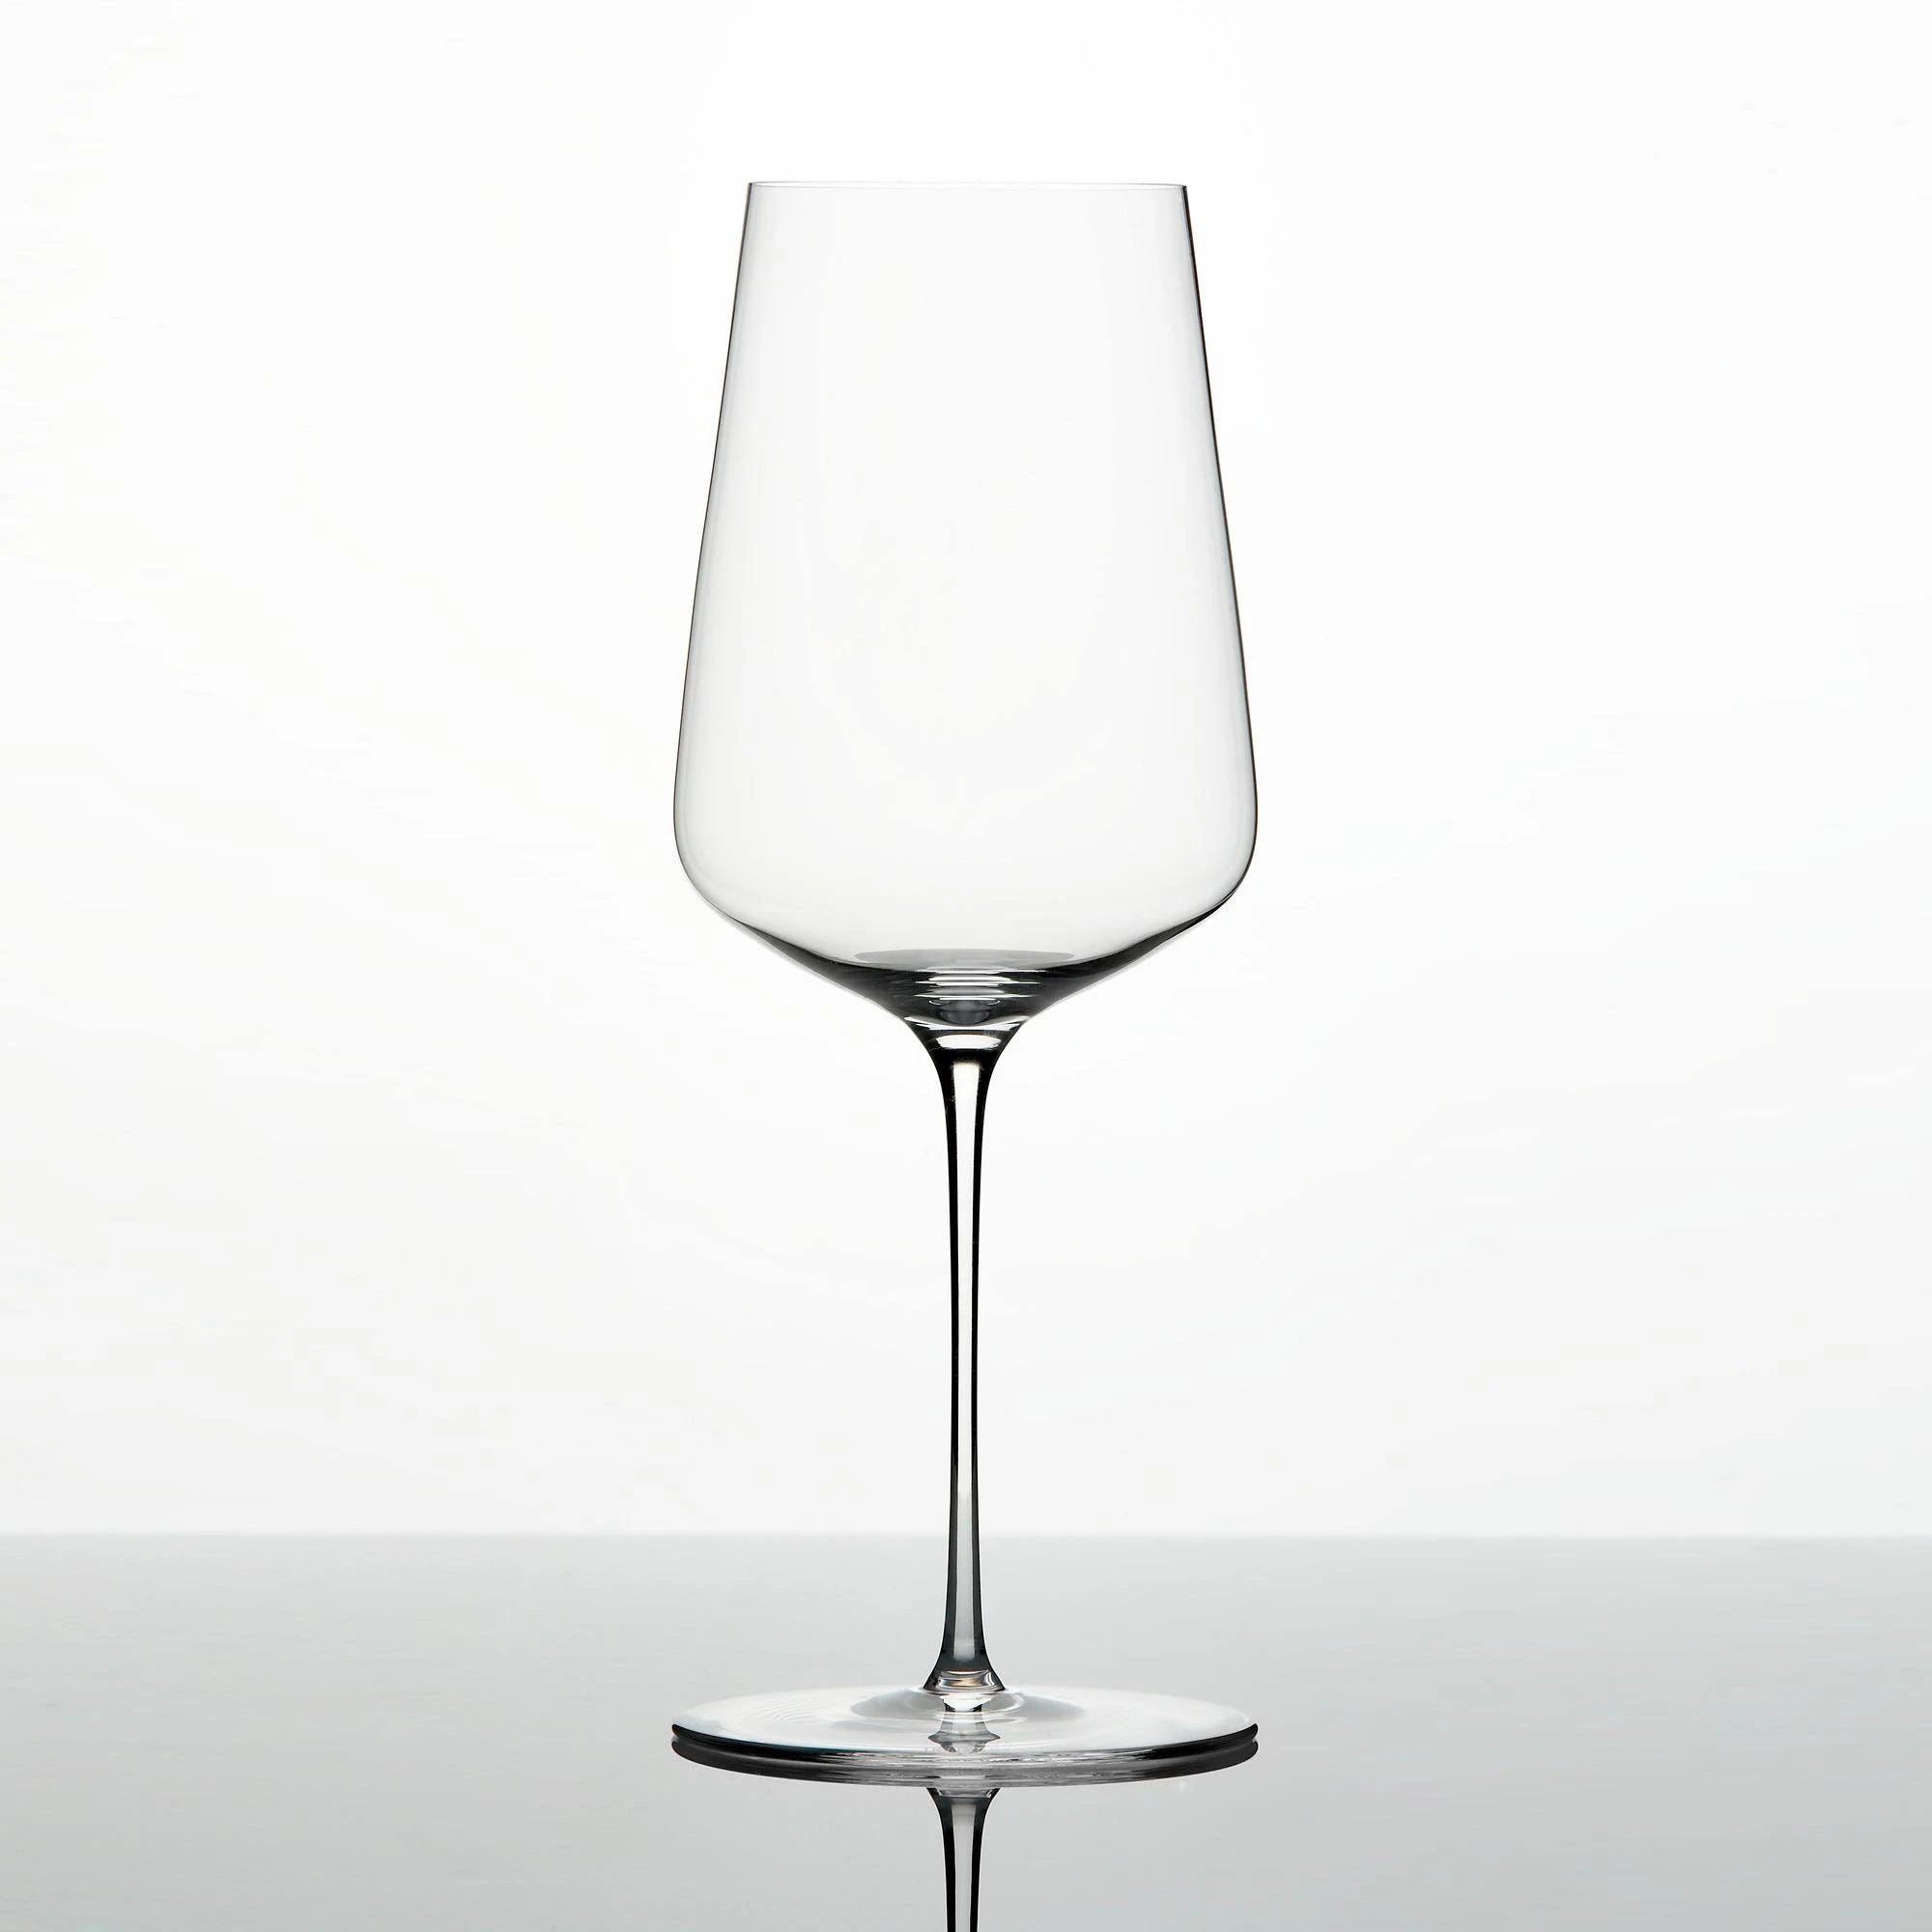 High-Quality Universal Glass for Red Wine Appreciation | Image